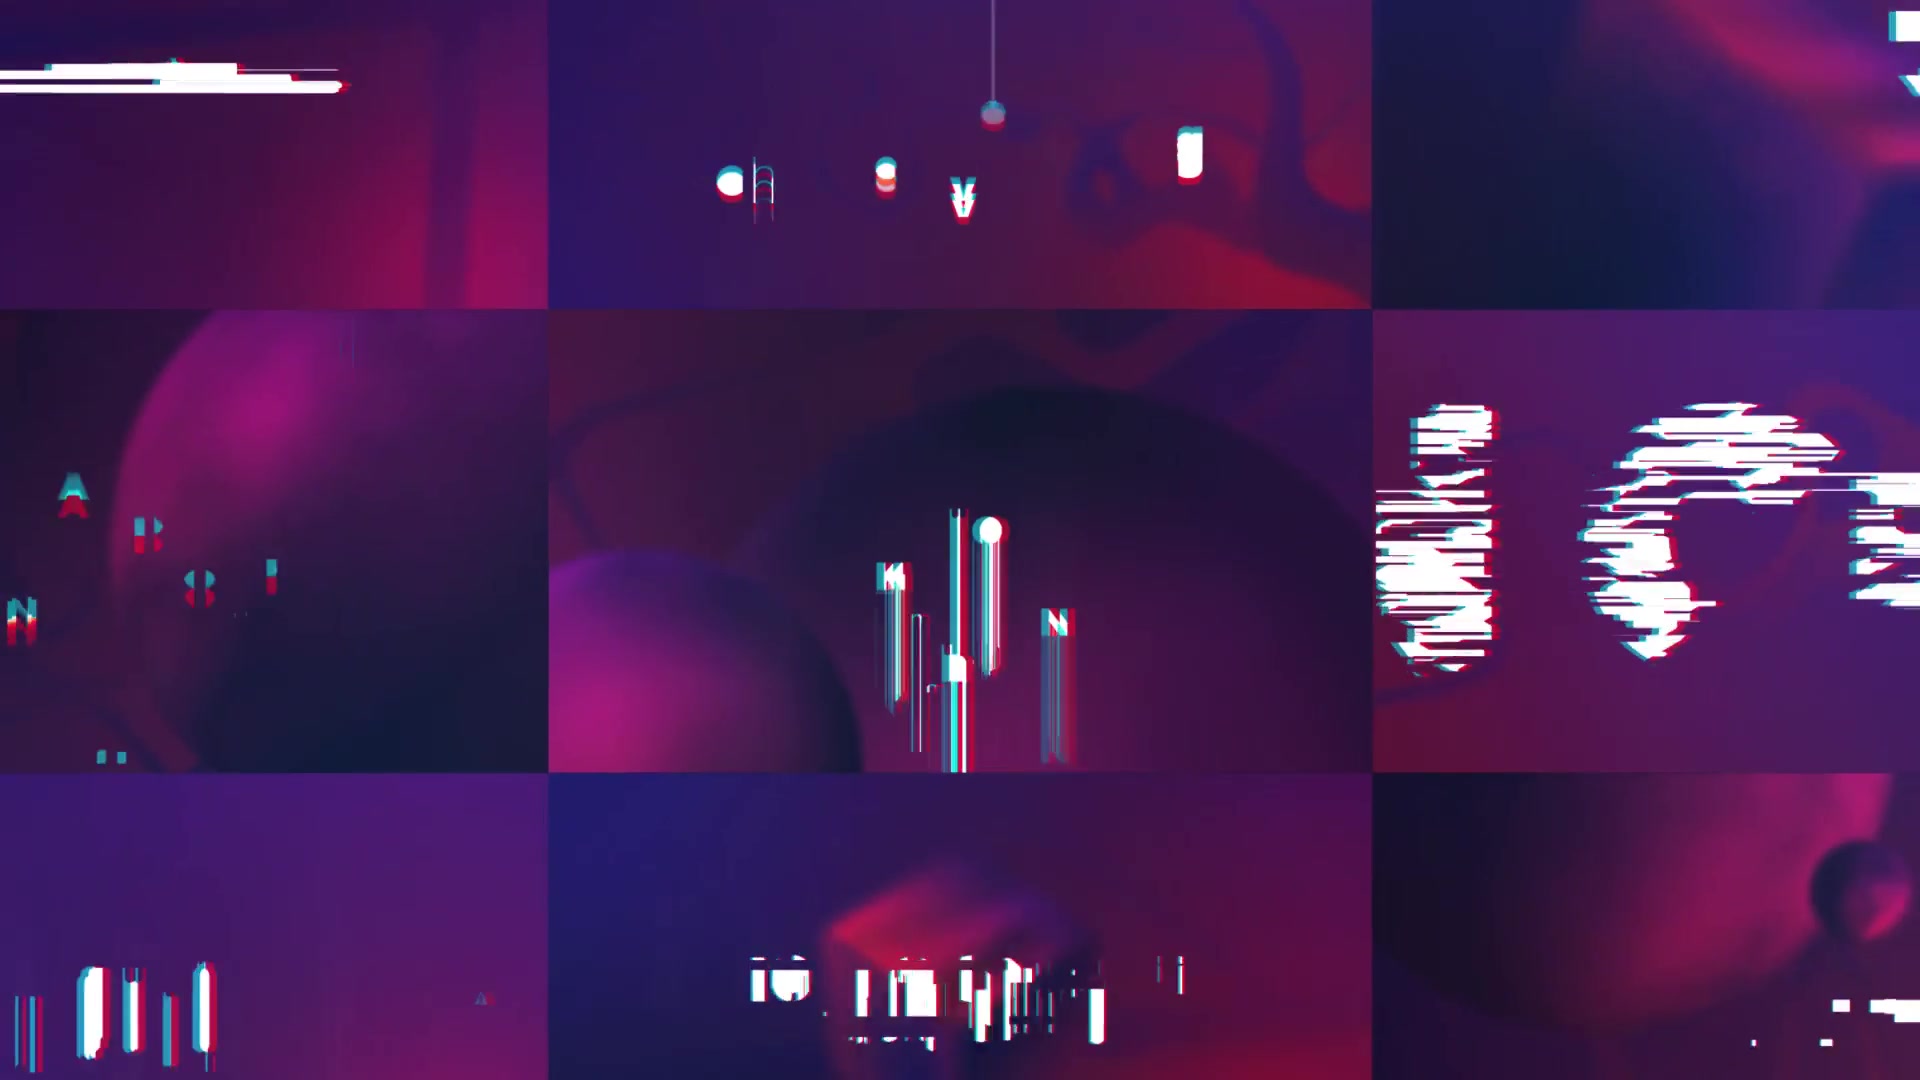 Glitch Titles Sequence Mogrt - Download Videohive 22424385